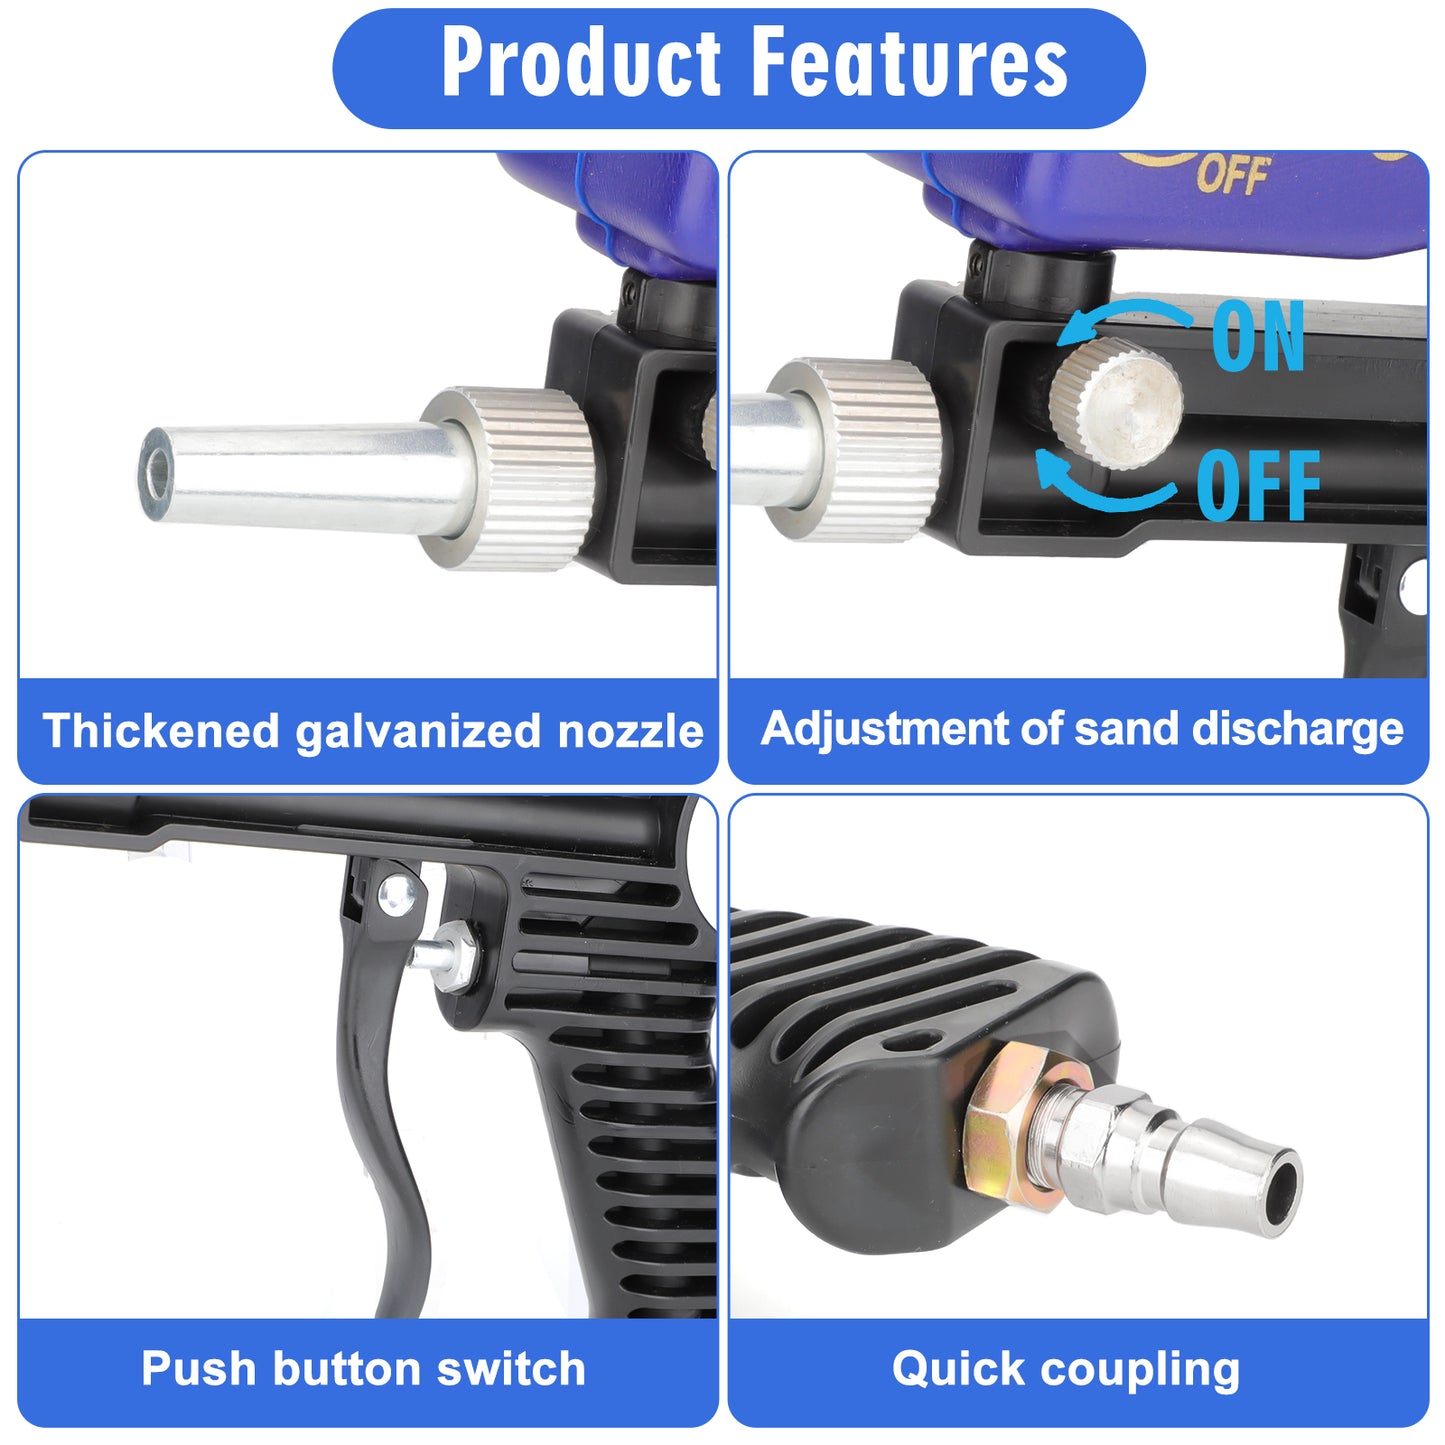 Handheld Sandblasting Gun - Durable Alloy Steel Construction, Versatile Nozzle, Perfect for Rust Removal, Paint Stripping, and Grime Cleaning